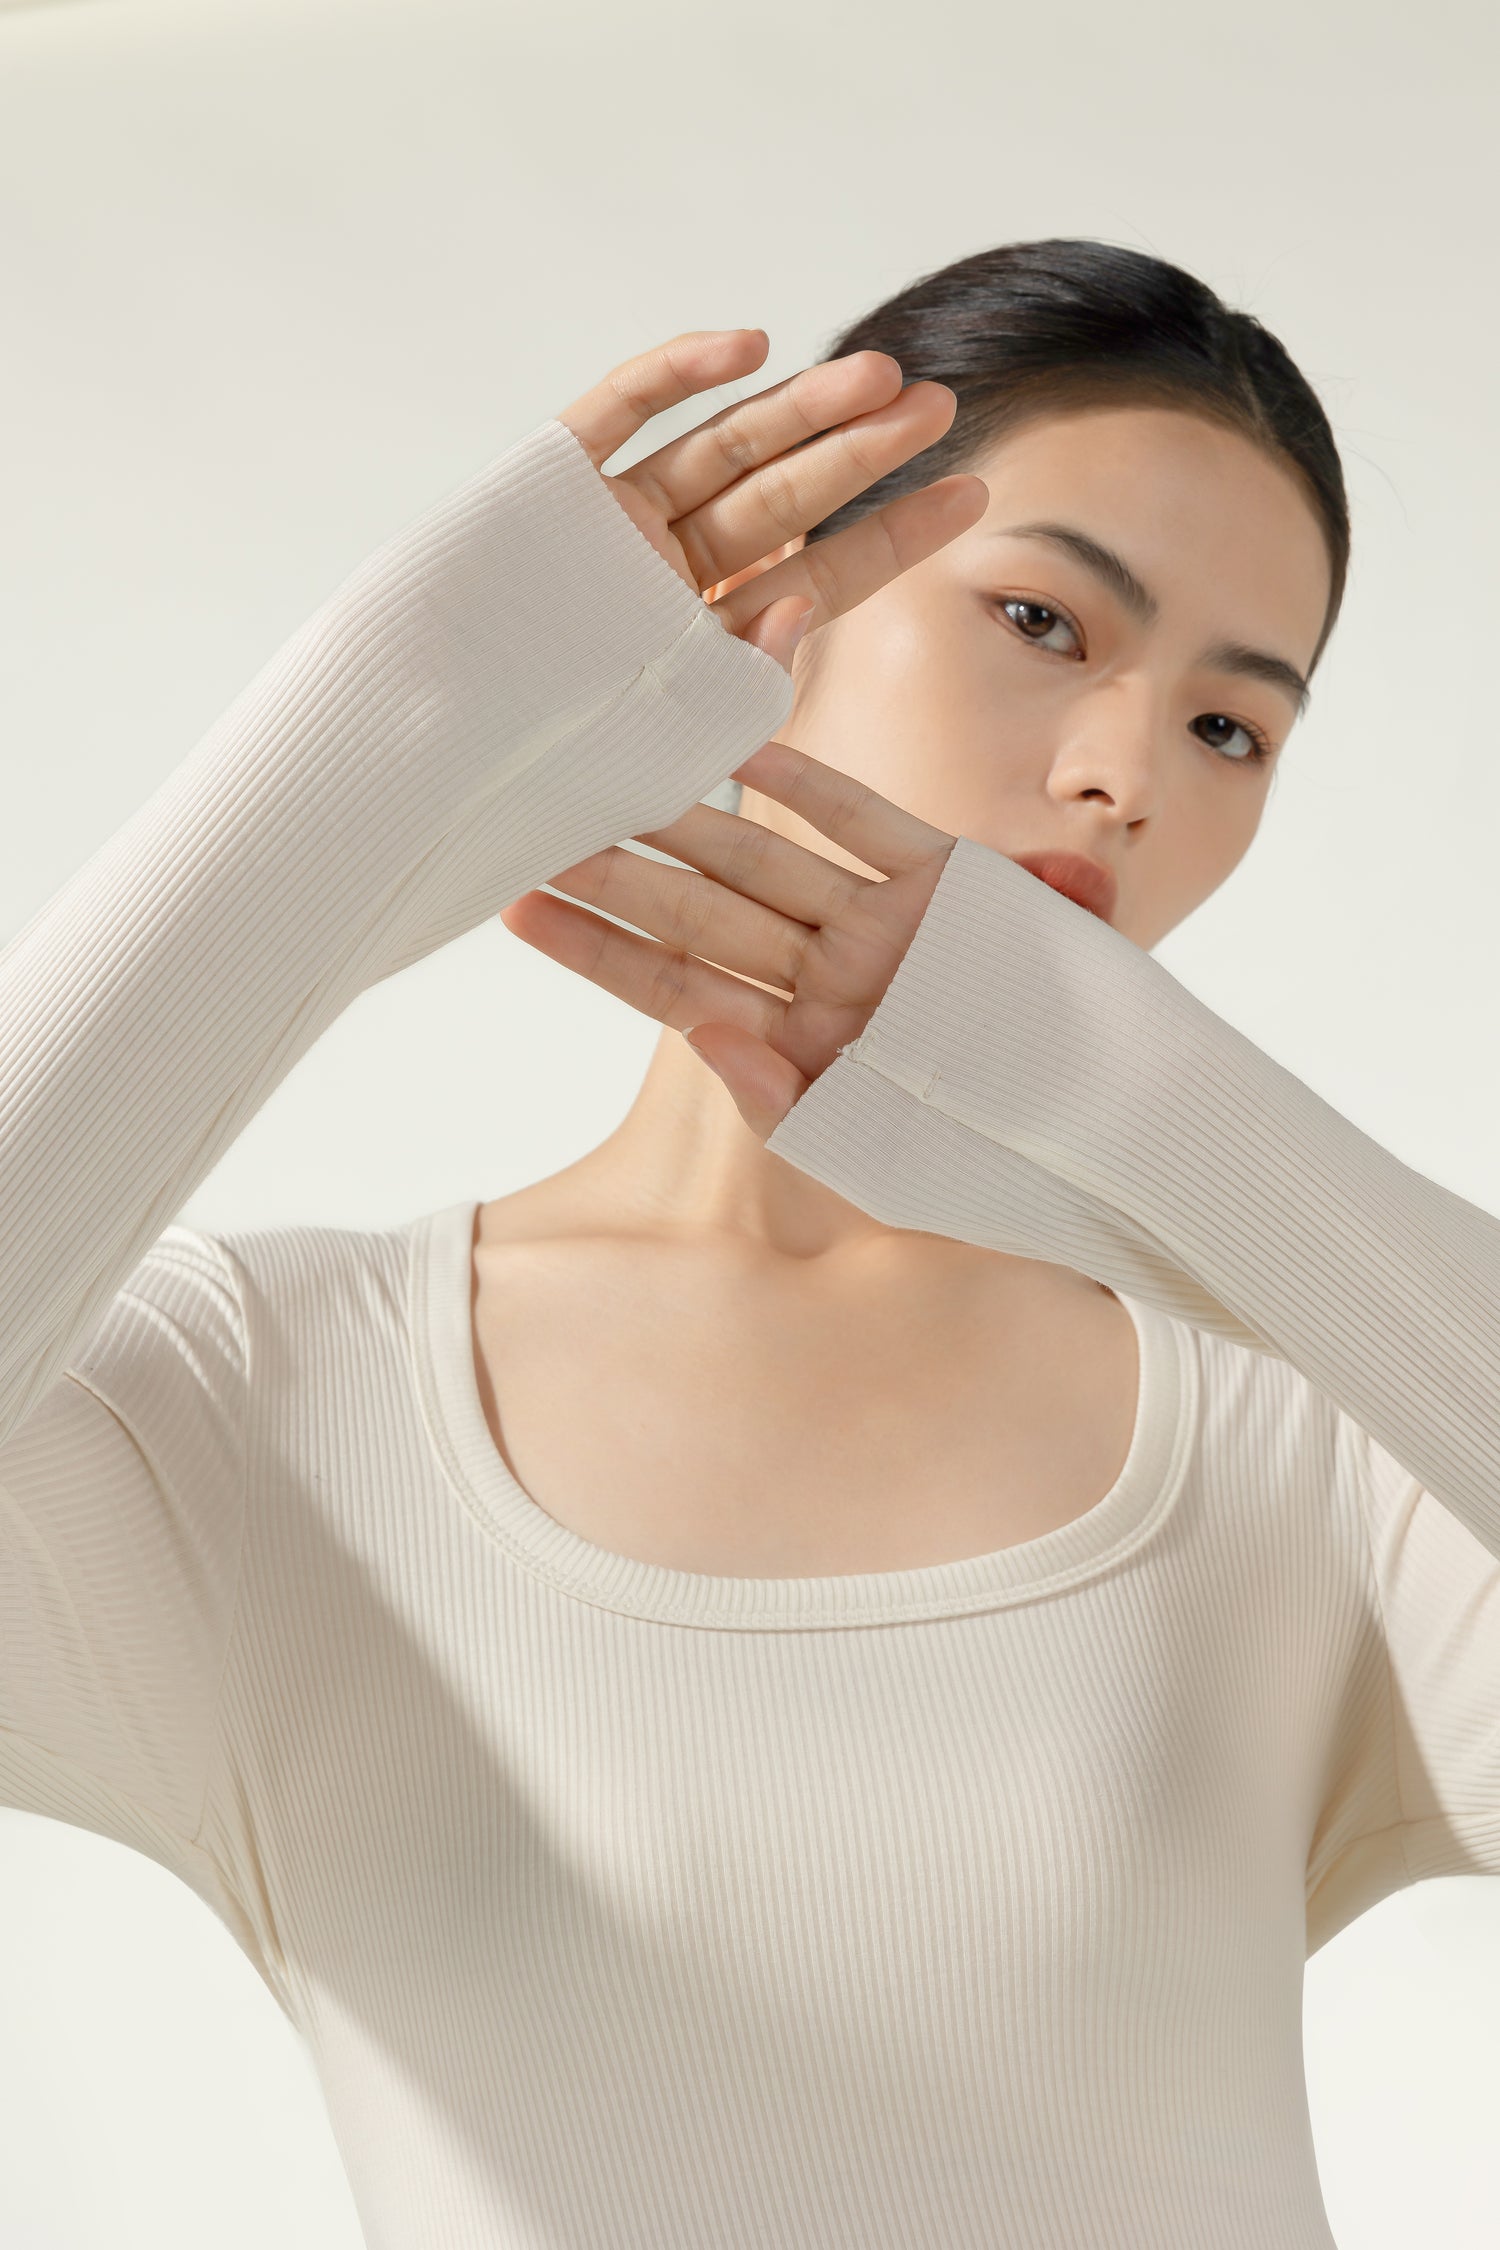 Introducing the White Acrylic Long Sleeve U-Neck Thermal Top by Hikesity. Warmth is woven into every extra fine, antibacterial fiber.